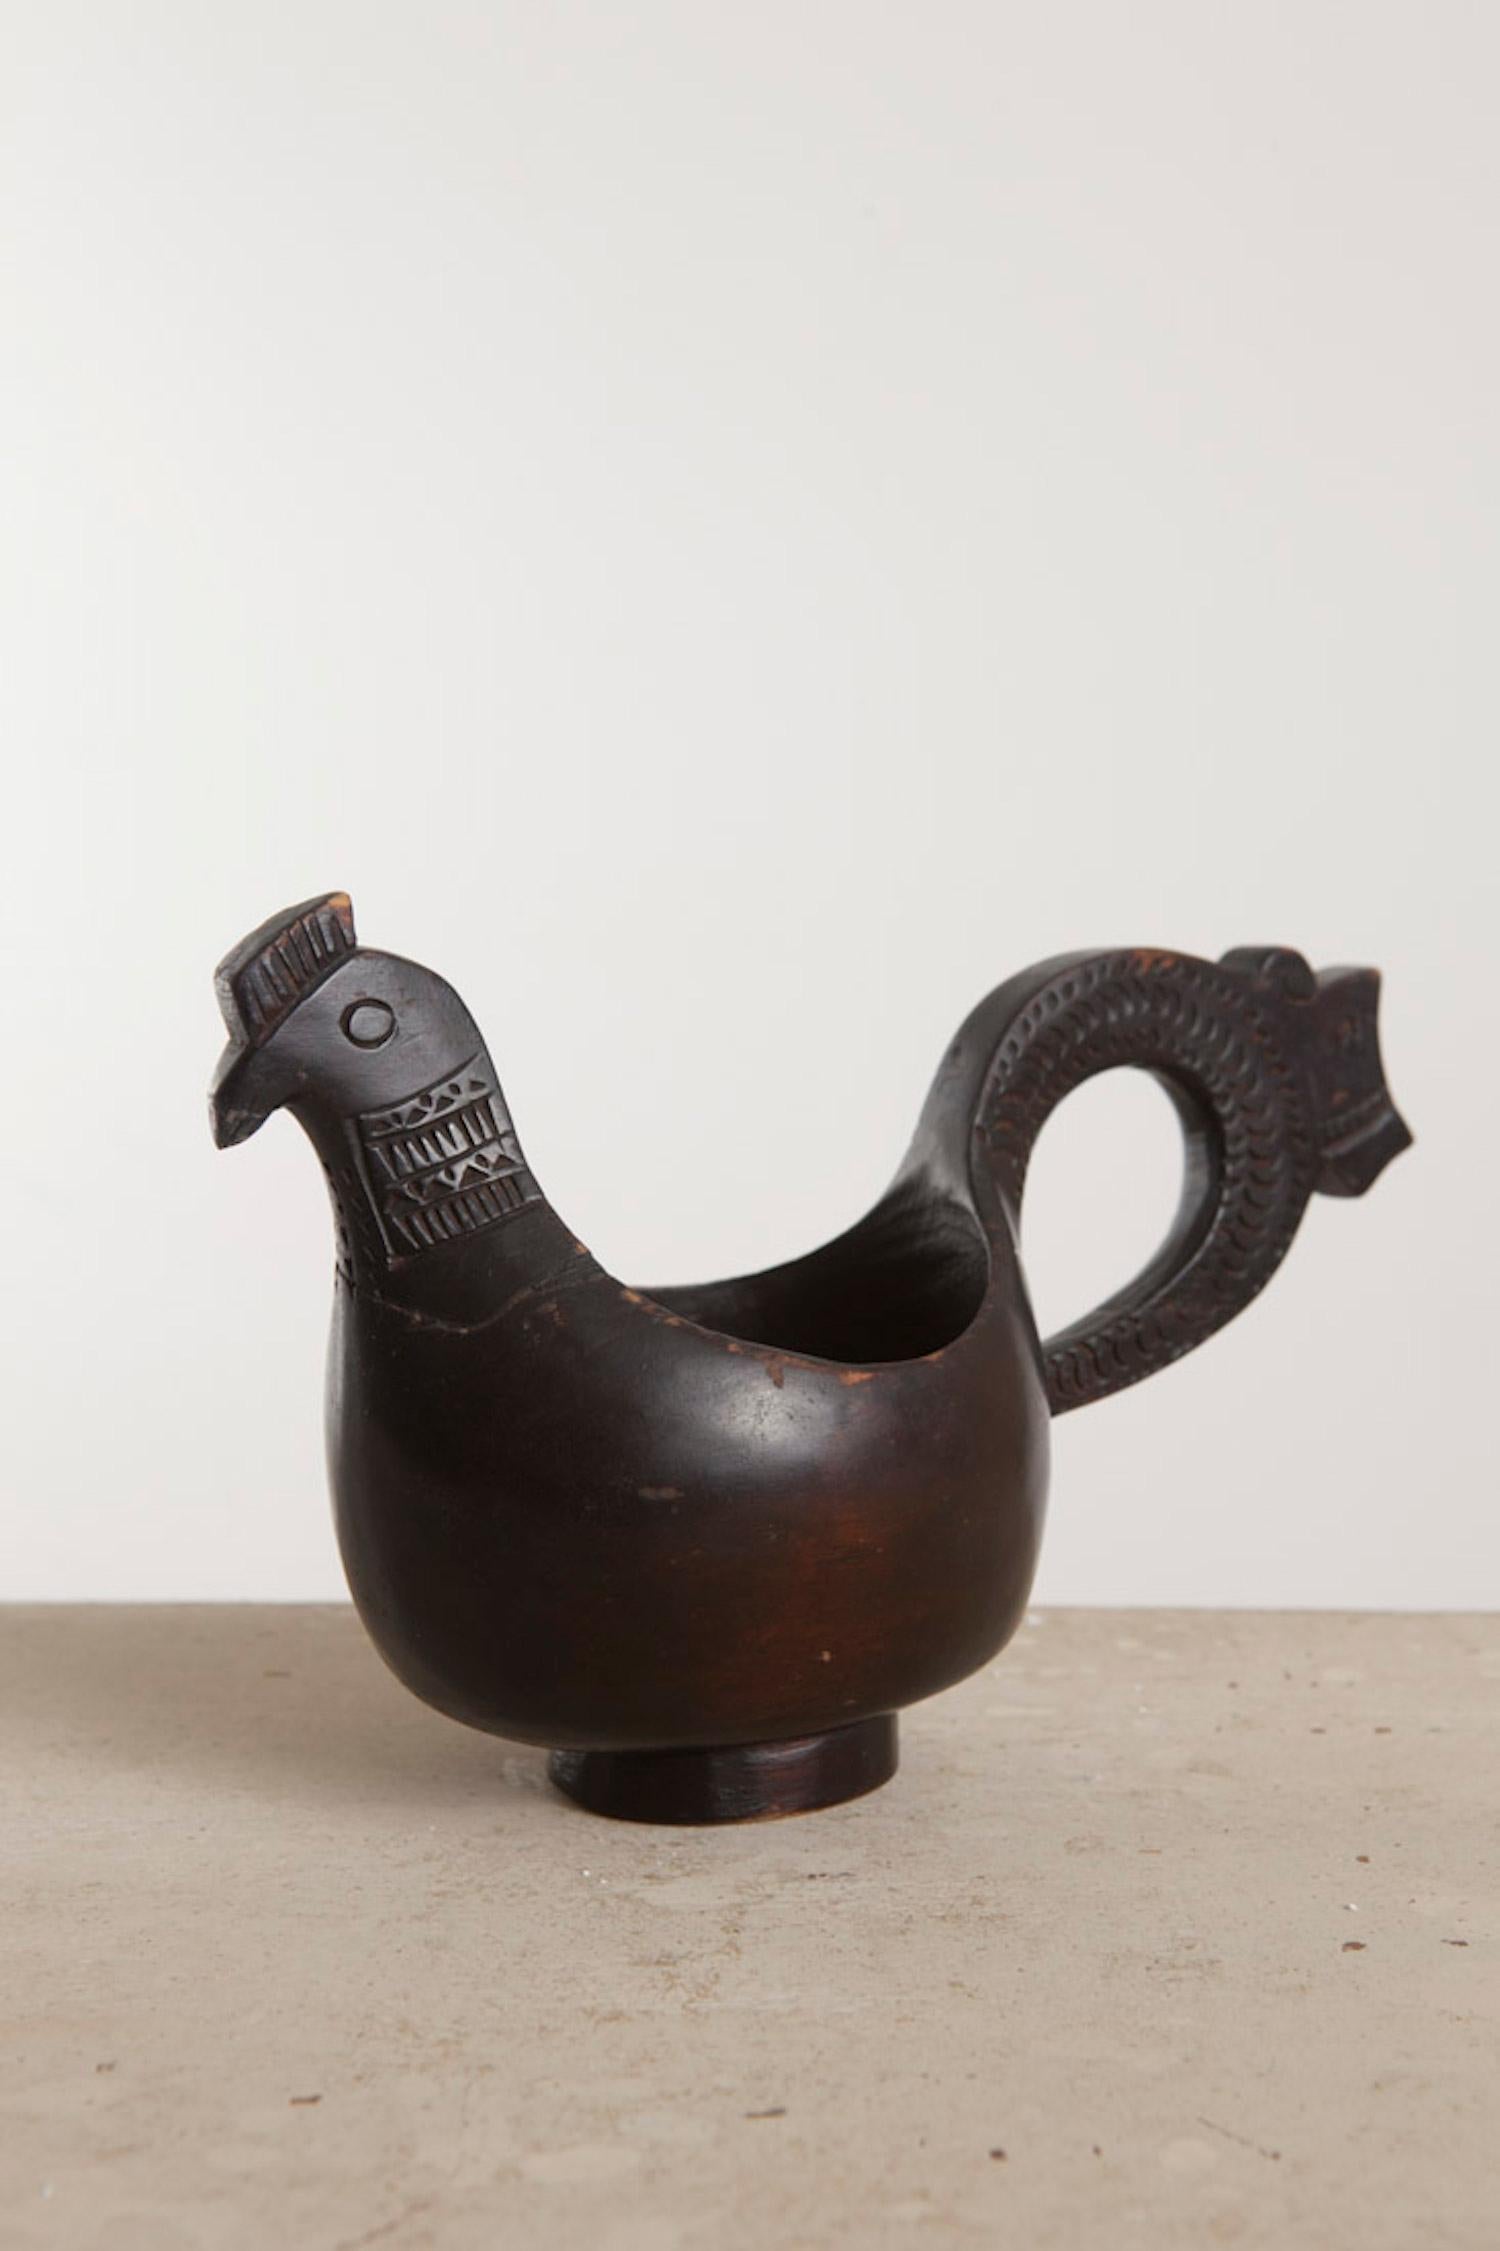 Allmoge hand-carved Ale Hen, origin: Scandinavia, circa 1800

An interesting custom in Scandinavia concerned the bride by her mother-in-law upon the return from the church. Before she dismounted from her horse she was given a small carved bowl